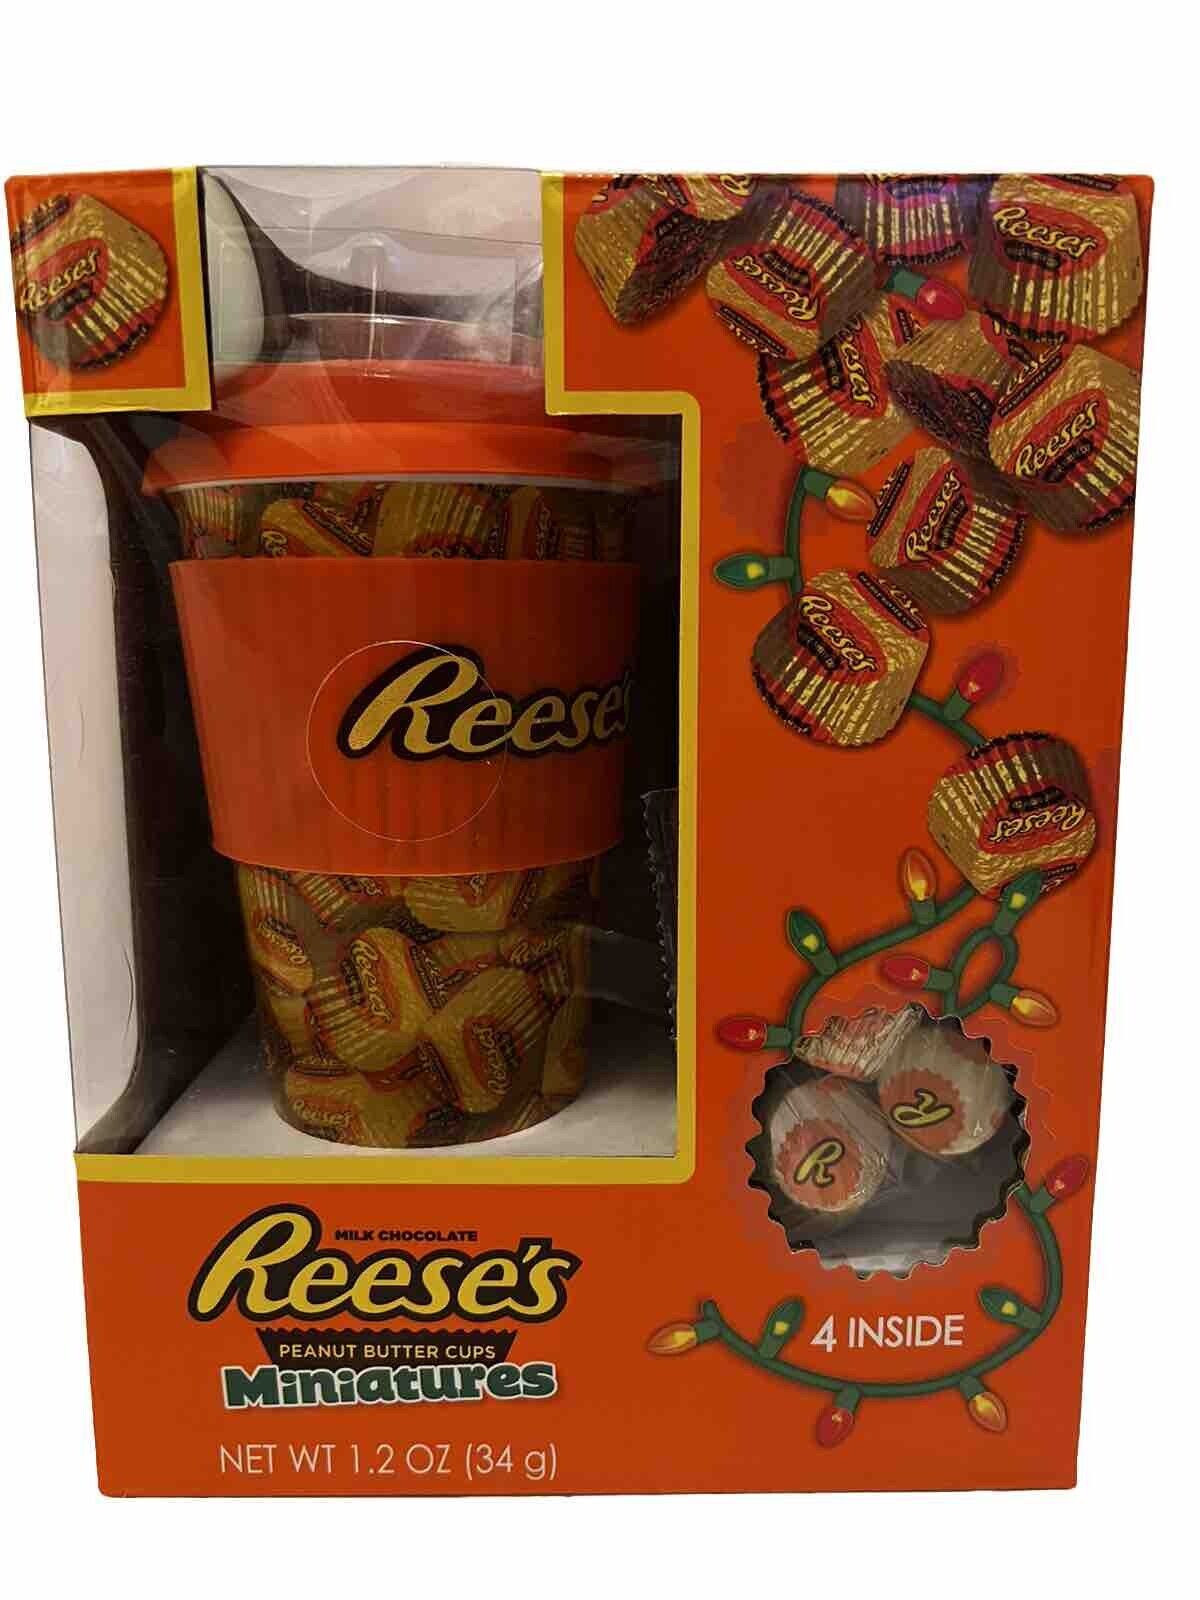 Reese's Ceramic Travel Tumbler, 2019/2020 edition, candy inside expired